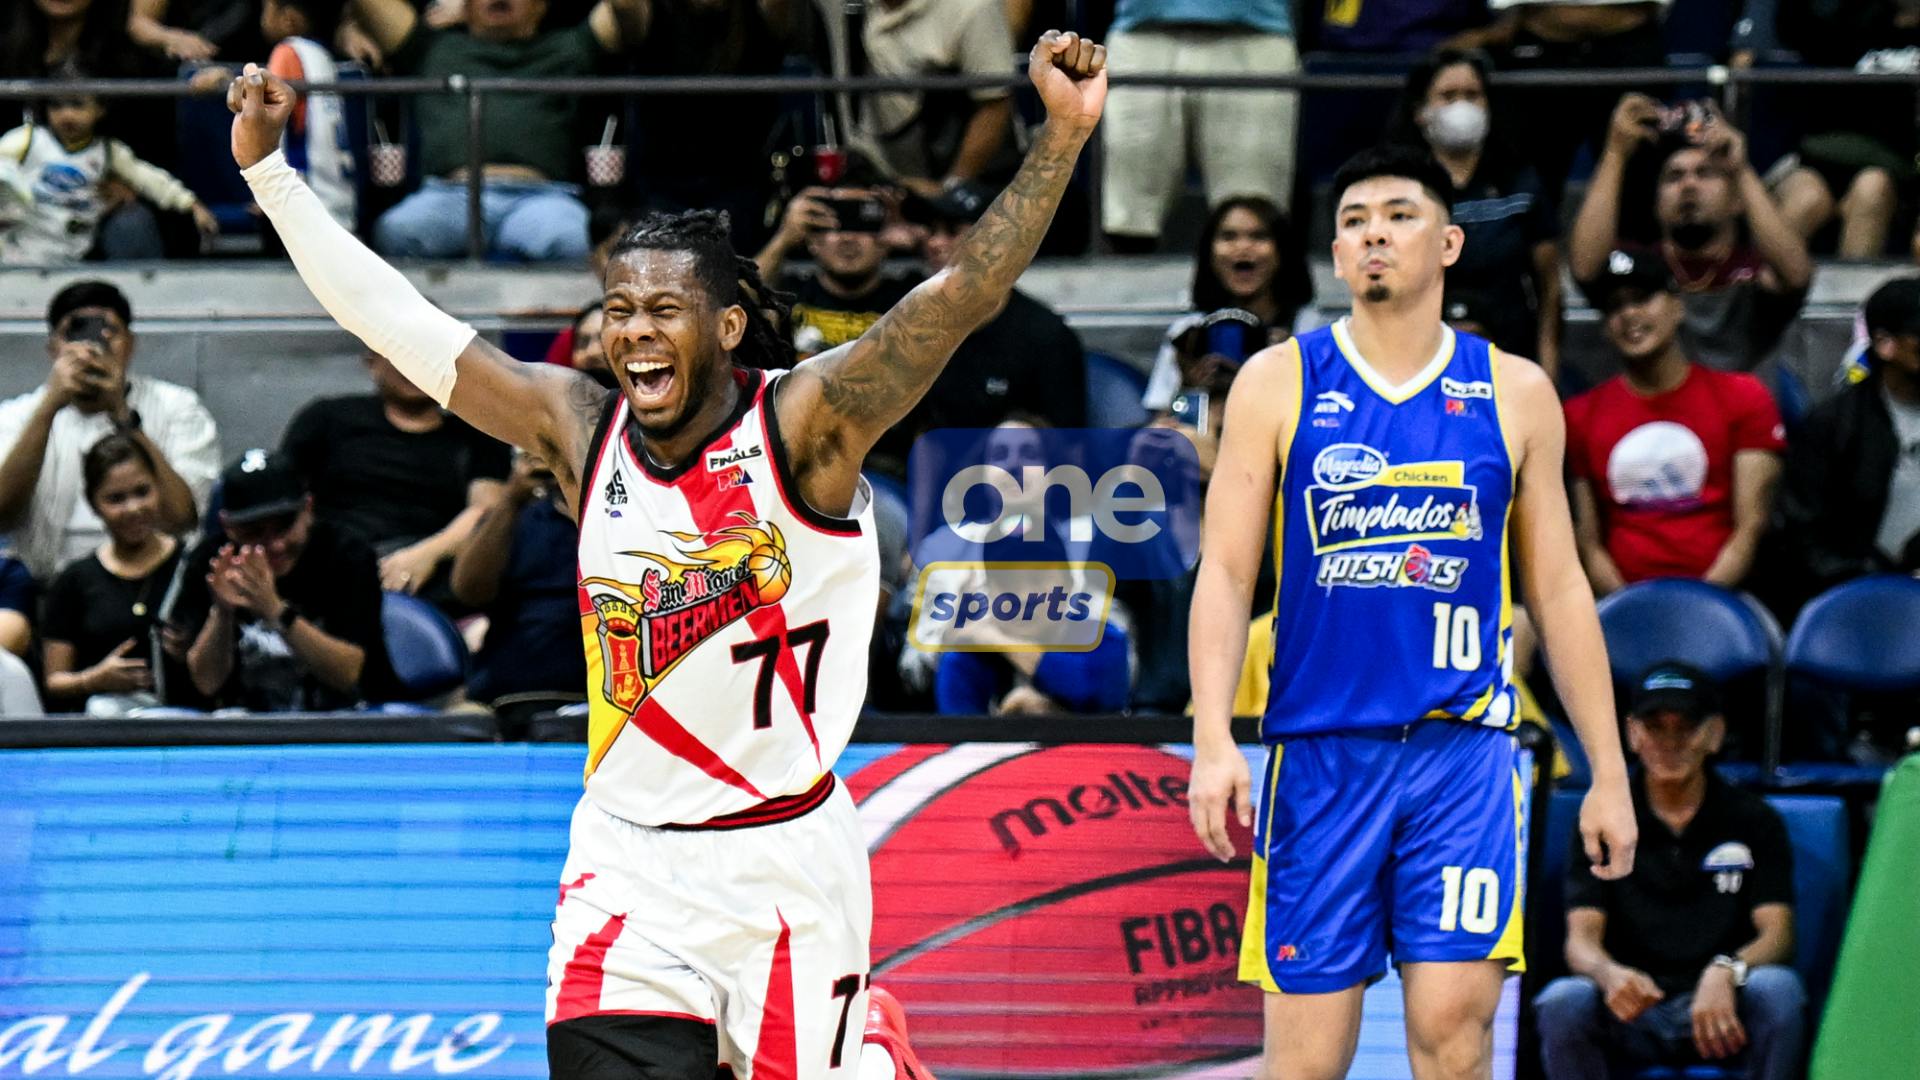 PBA schedule: Red-hot San Miguel and Magnolia clash in Commissioner